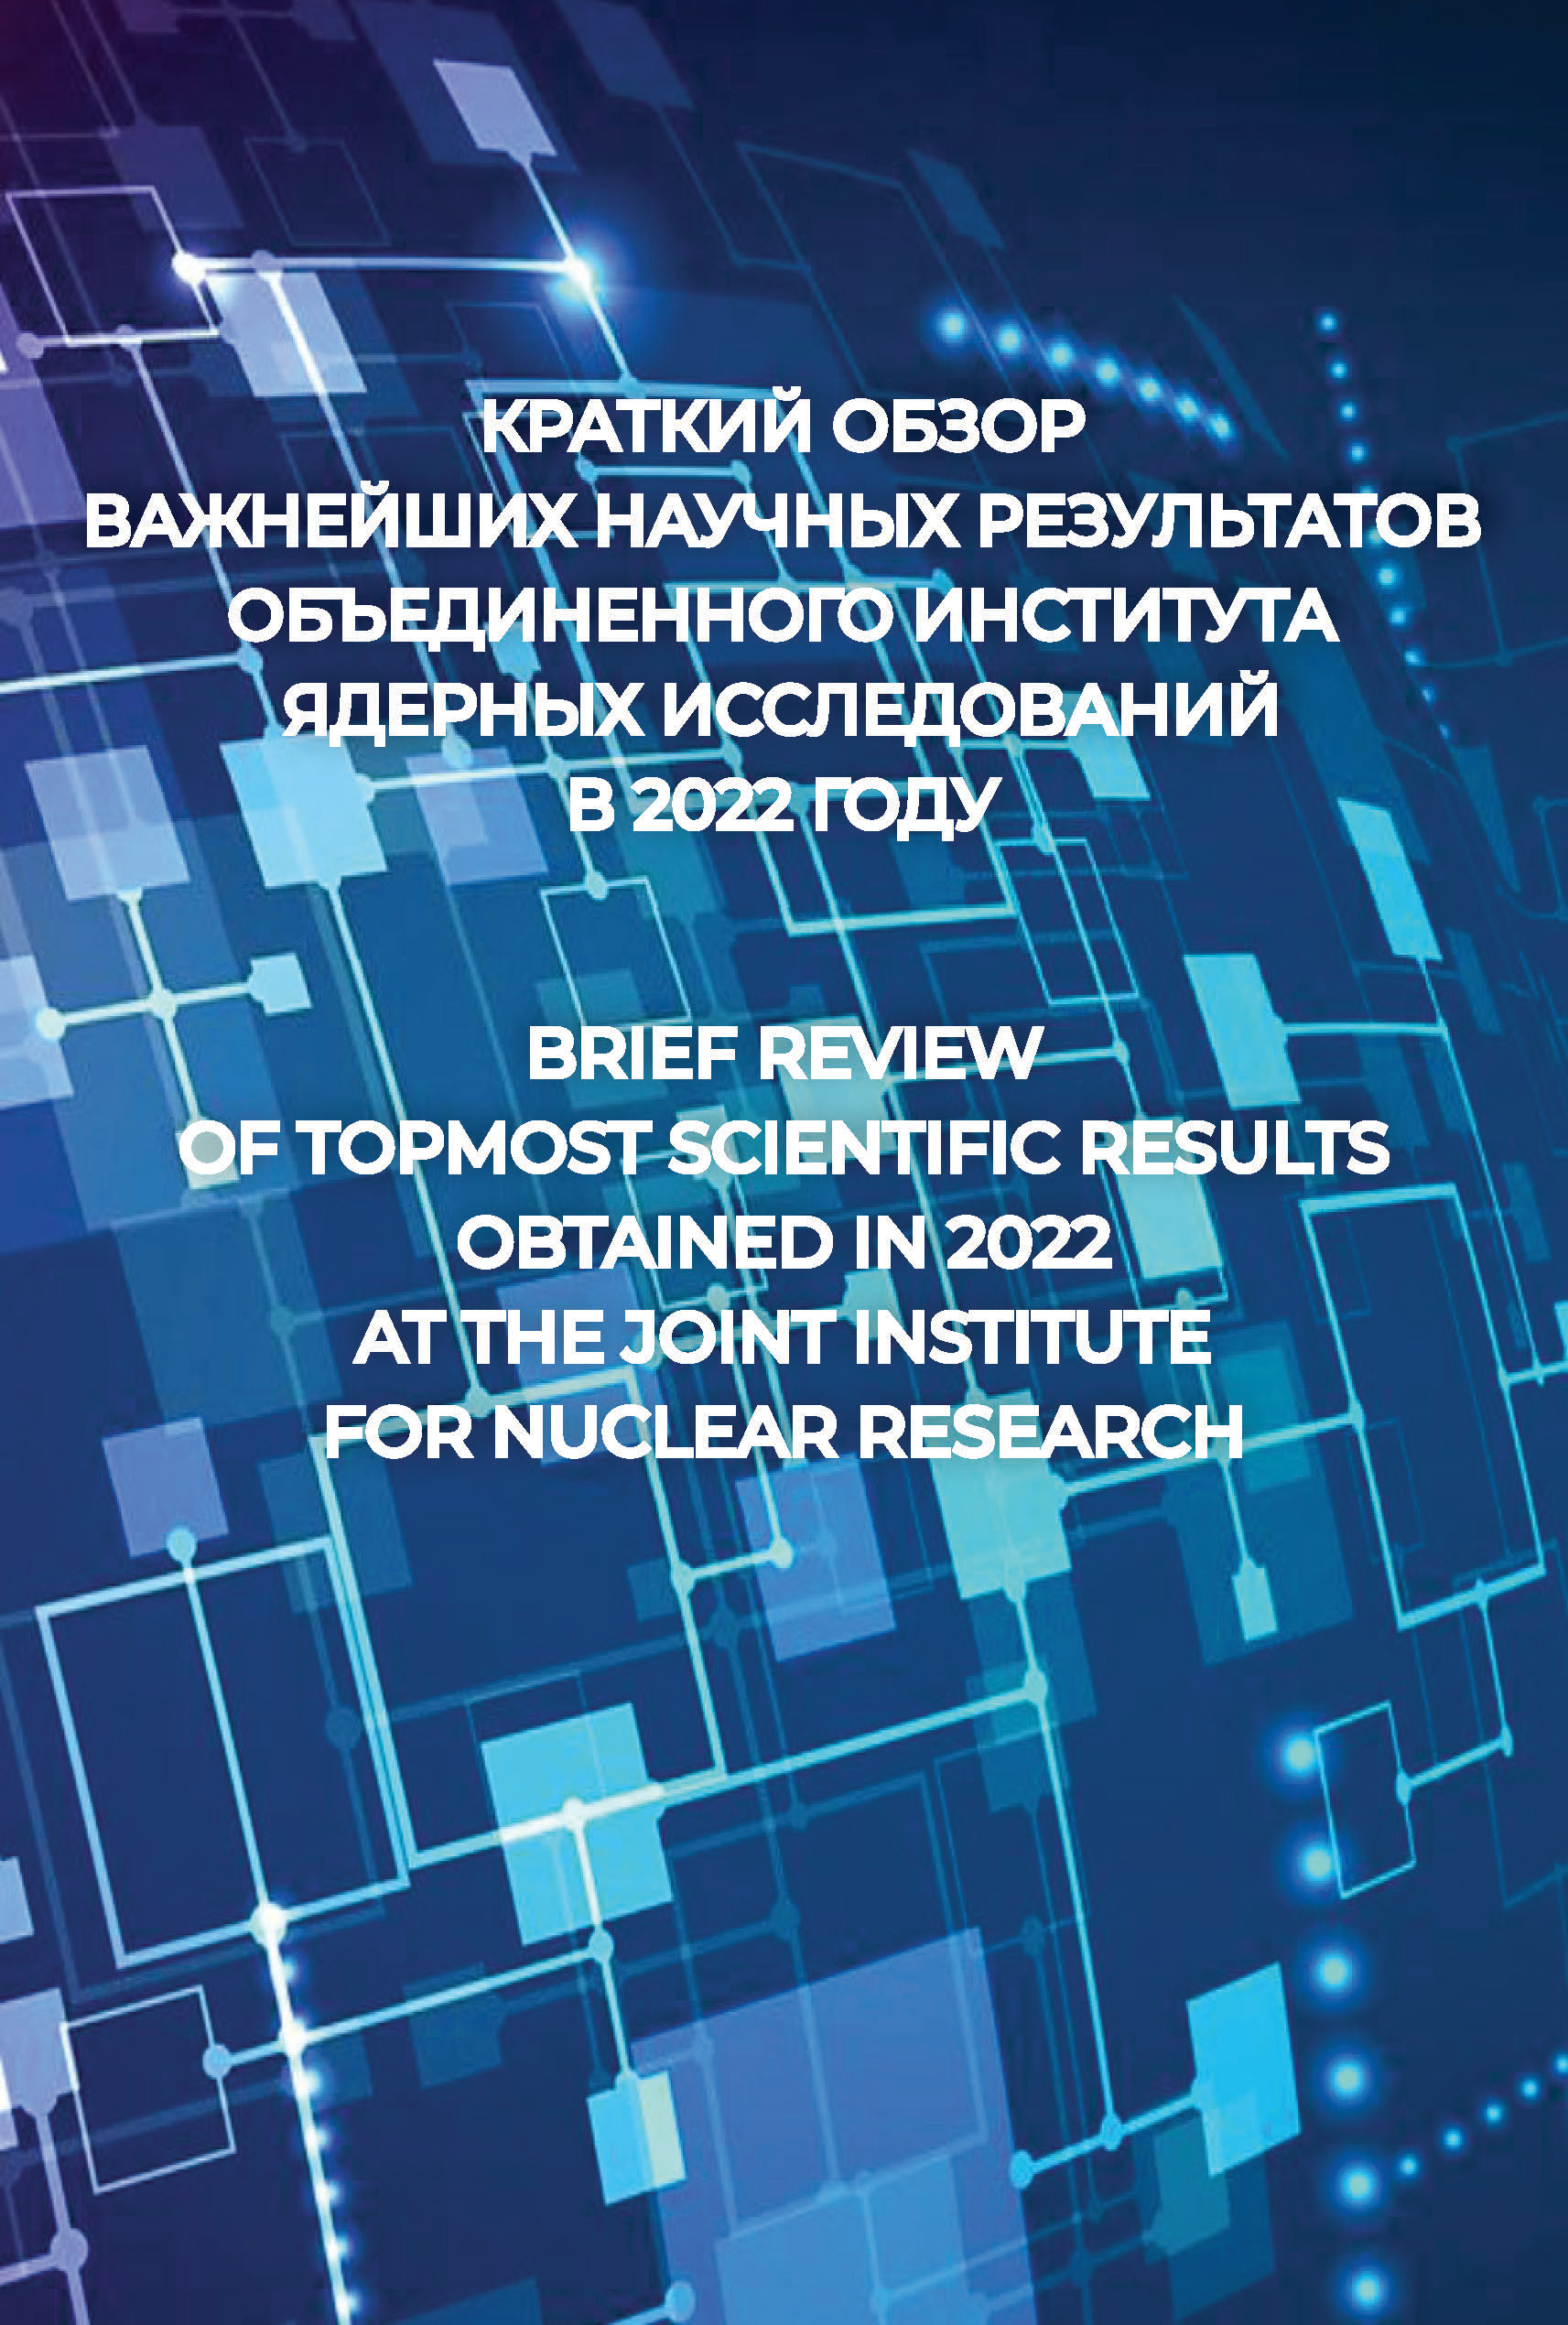 Brief review of topmost scientific results obtained in 2022 at the Joint Institute for Nuclear Research